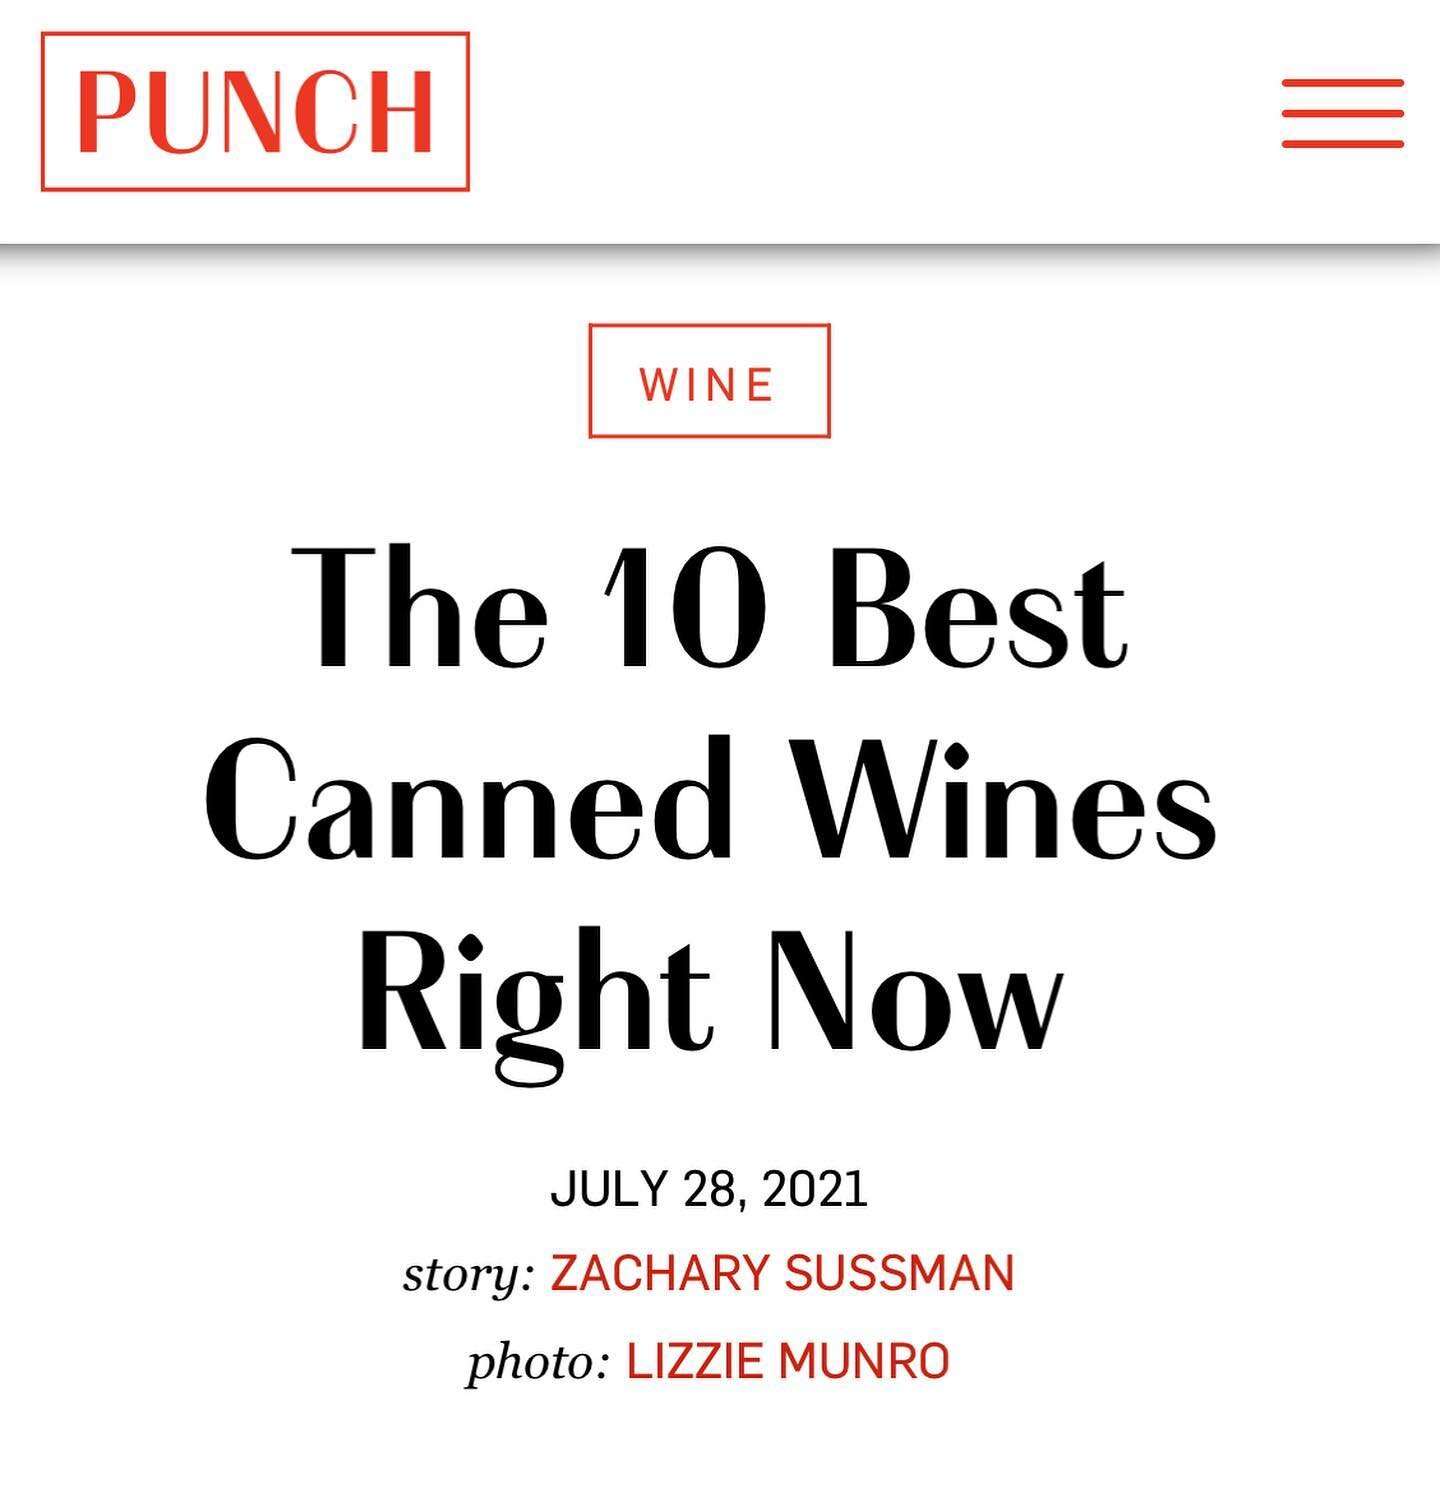 Thank you for the shout @punch_drink - a piece written just in time for summertime. We&rsquo;re honored to be on a list with these other producers, delicious wines all around. 

#cannedwine #summertimesipper #errrydayimriesling